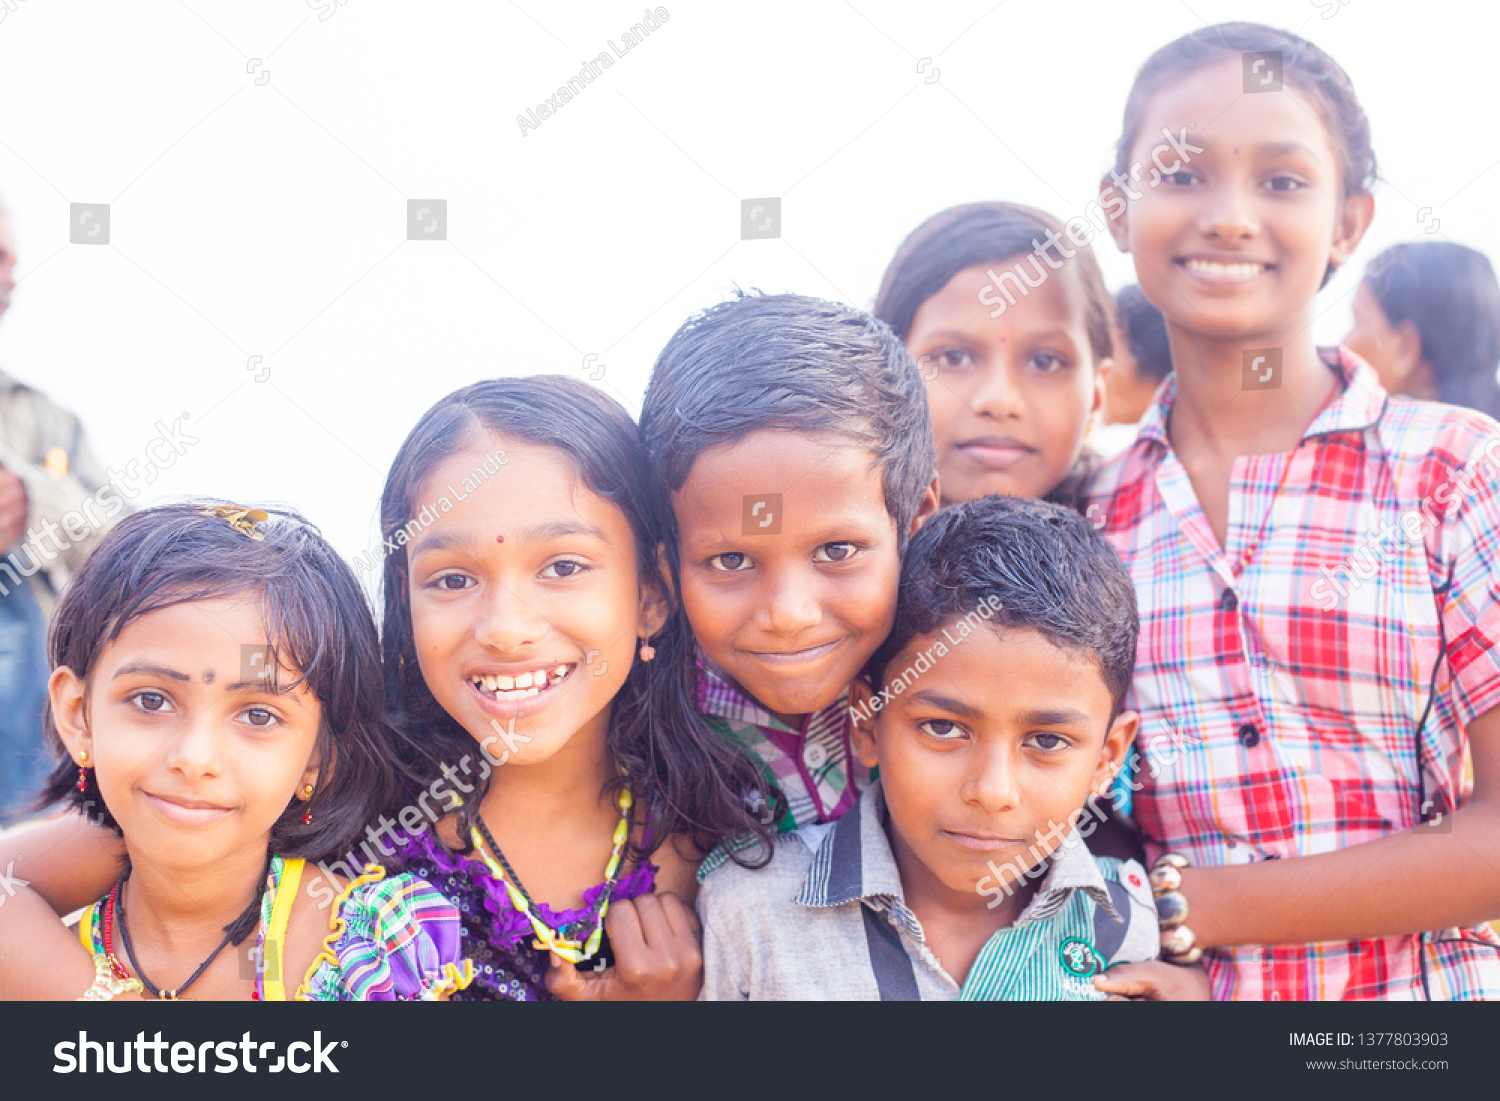 VARKALA, KERALA, INDIA - DECEMBER 15, 2012: Portrait smiling indian children on Varkala during puja ceremony on holy place - on the Papanasam beach #1377803903